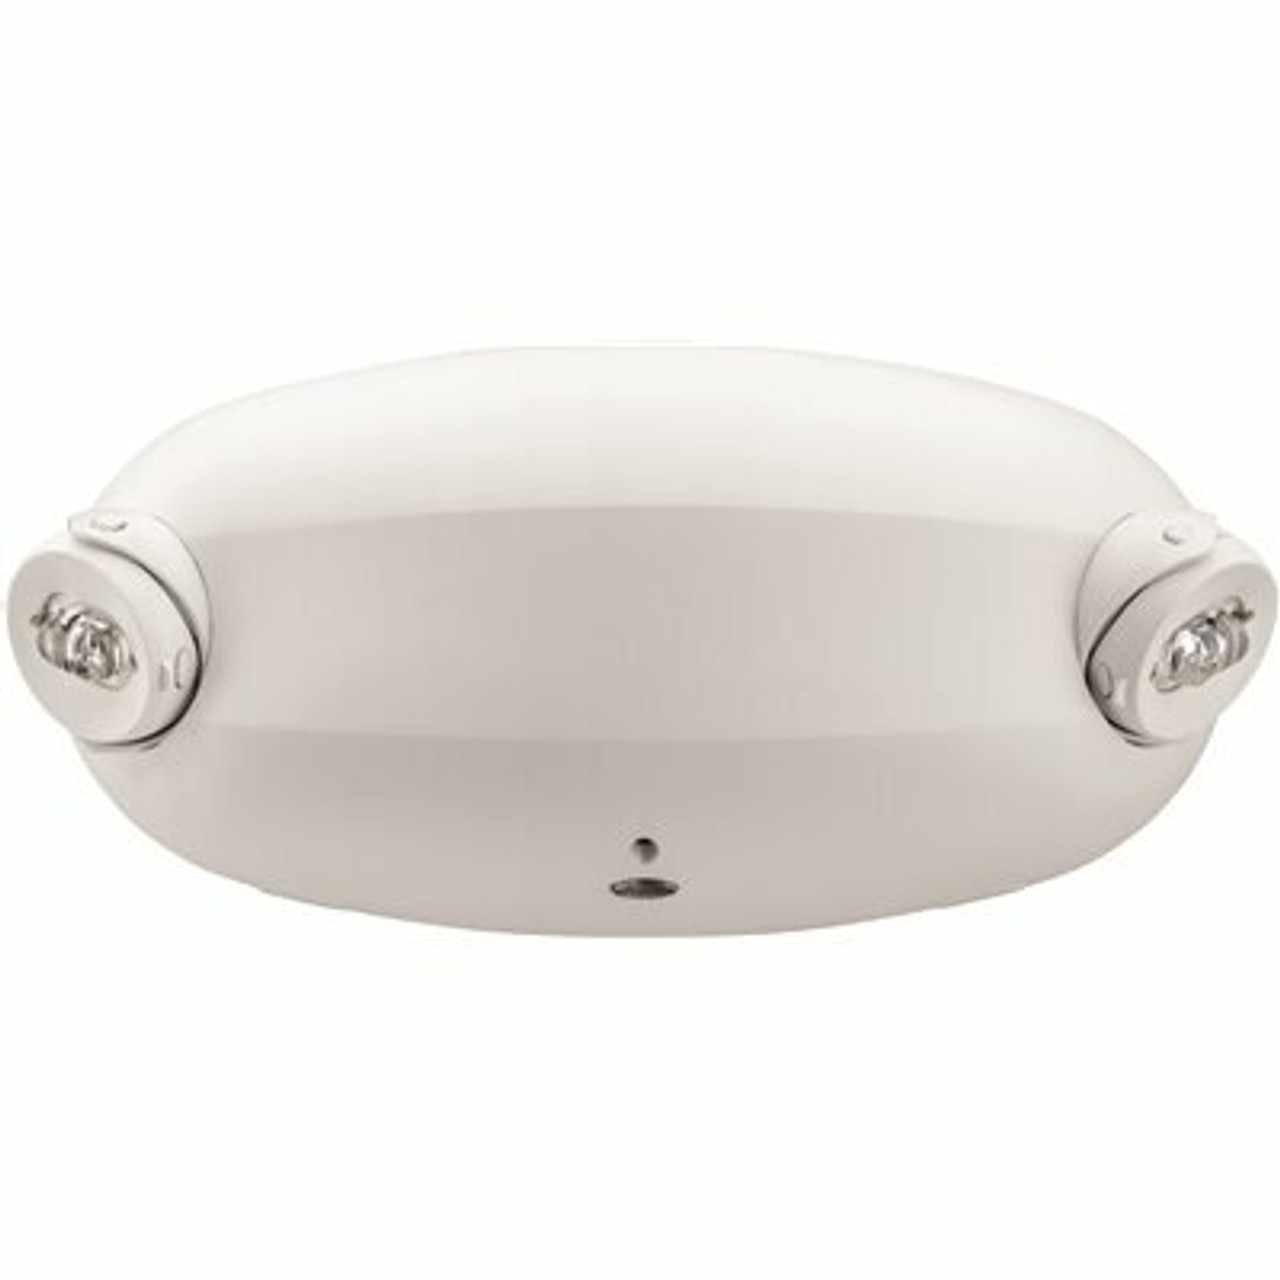 Lithonia Lighting Contractor Select Elm 120/277-Volt Integrated Led White Emergency Light Fixture With Battery